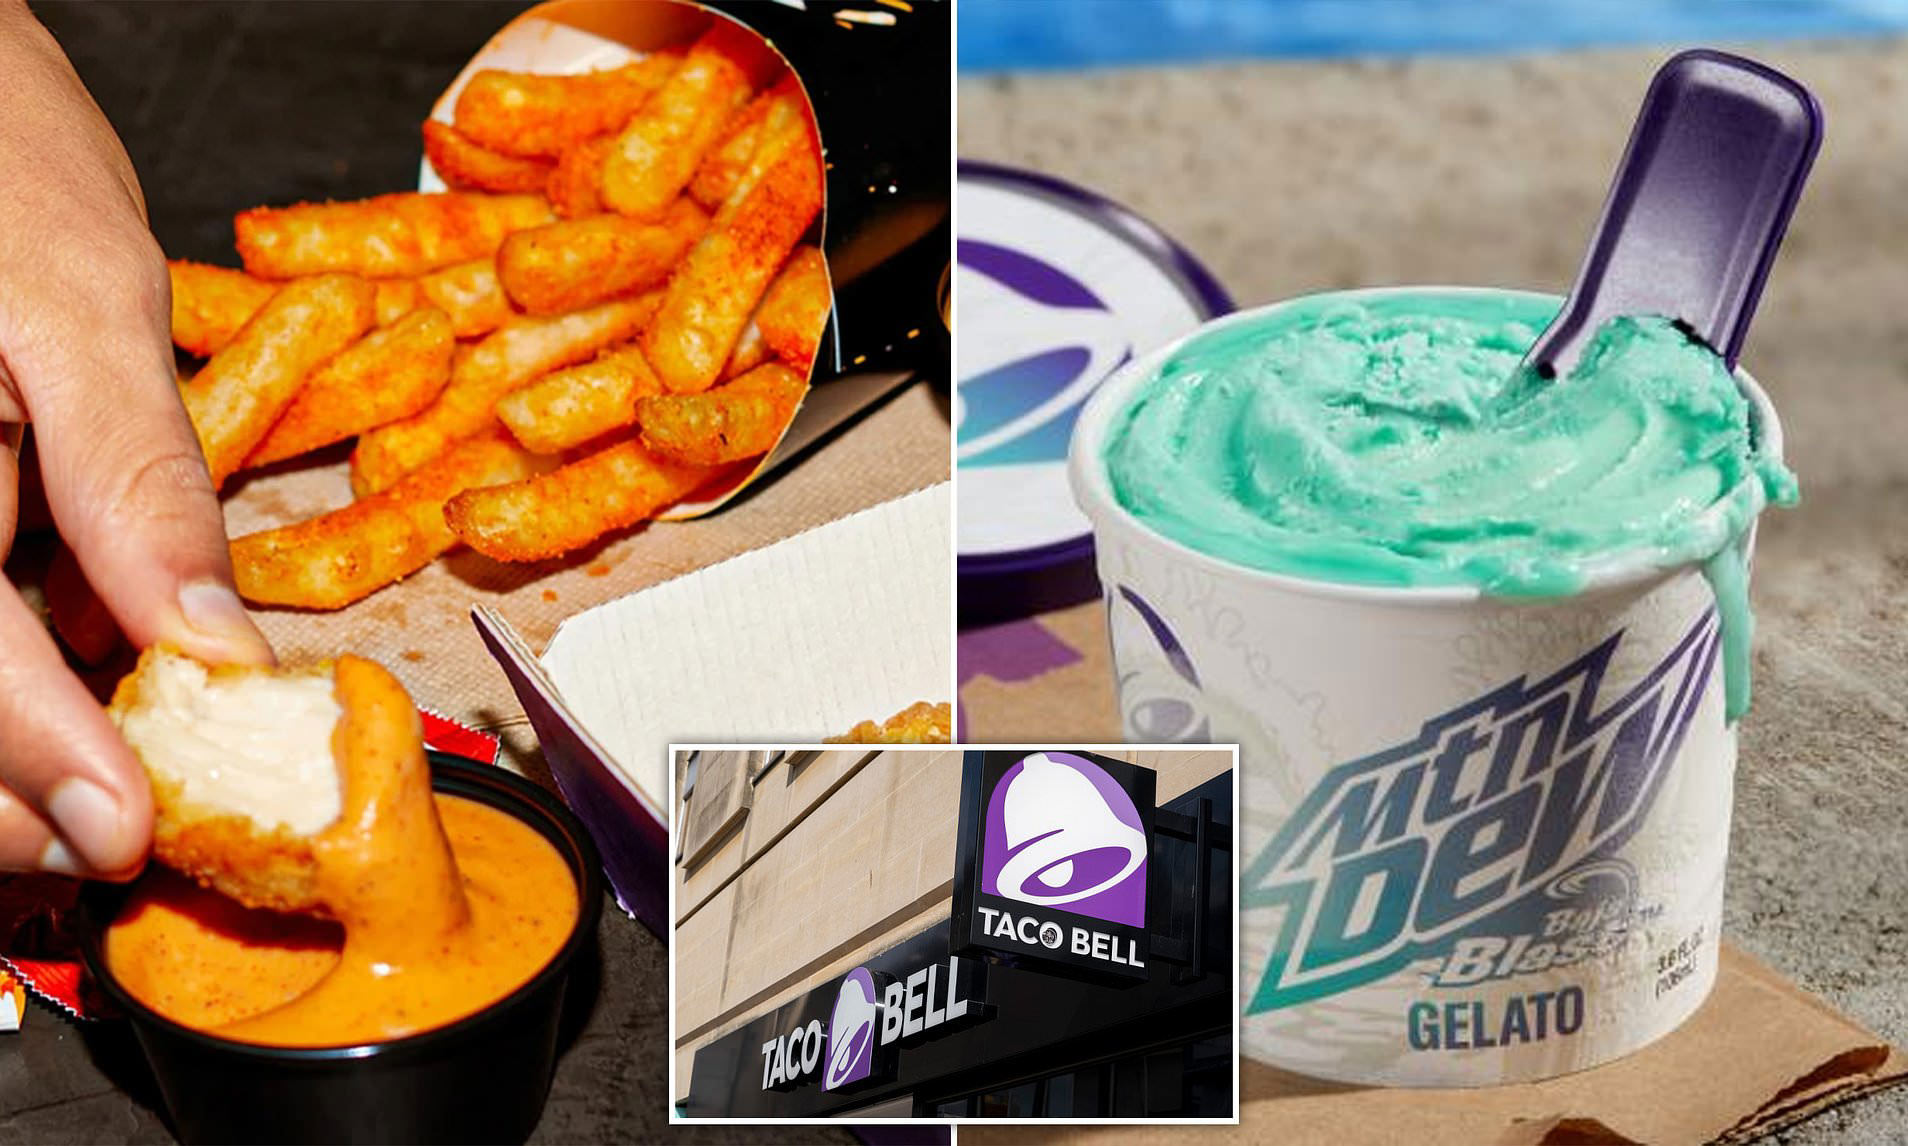 Chicken nuggets, Baja Blast gelato, and plenty more coming to Taco Bell